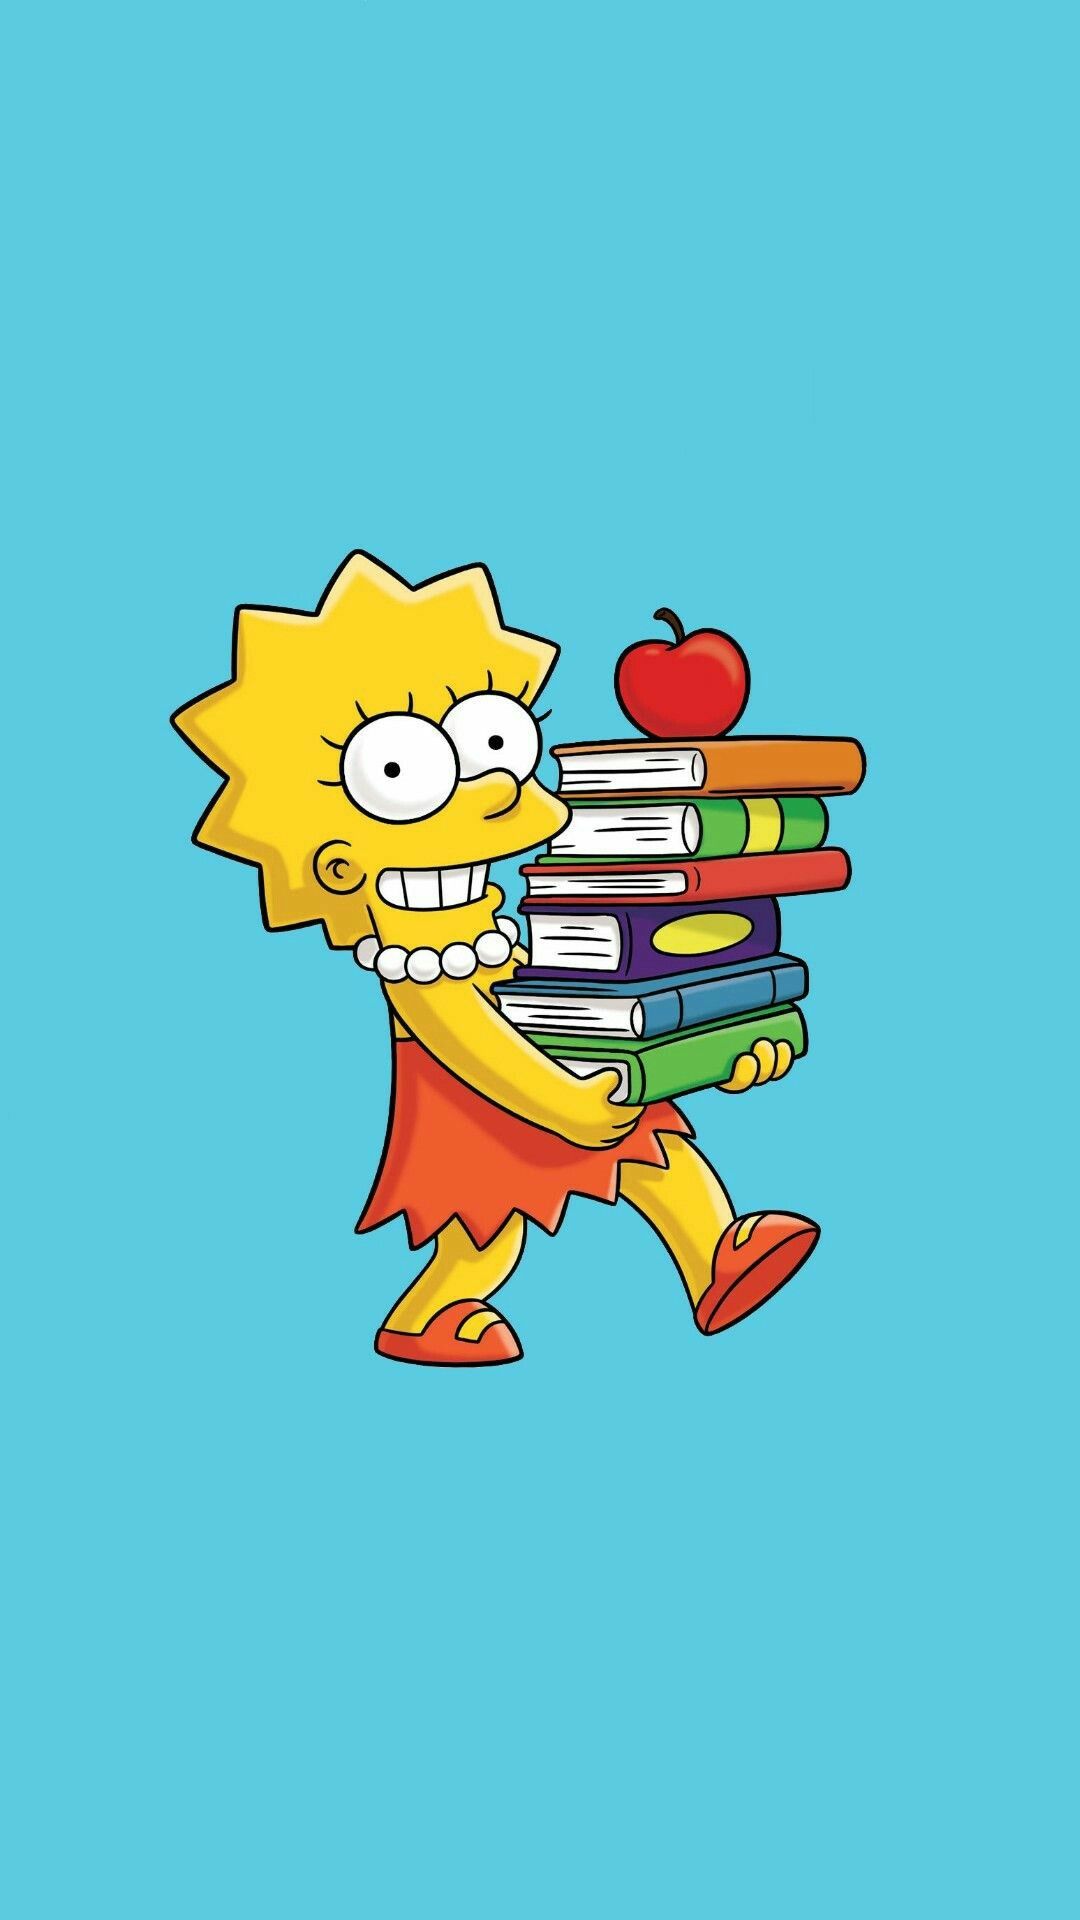 The Simpsons LisaK wallpaper, free and easy to download